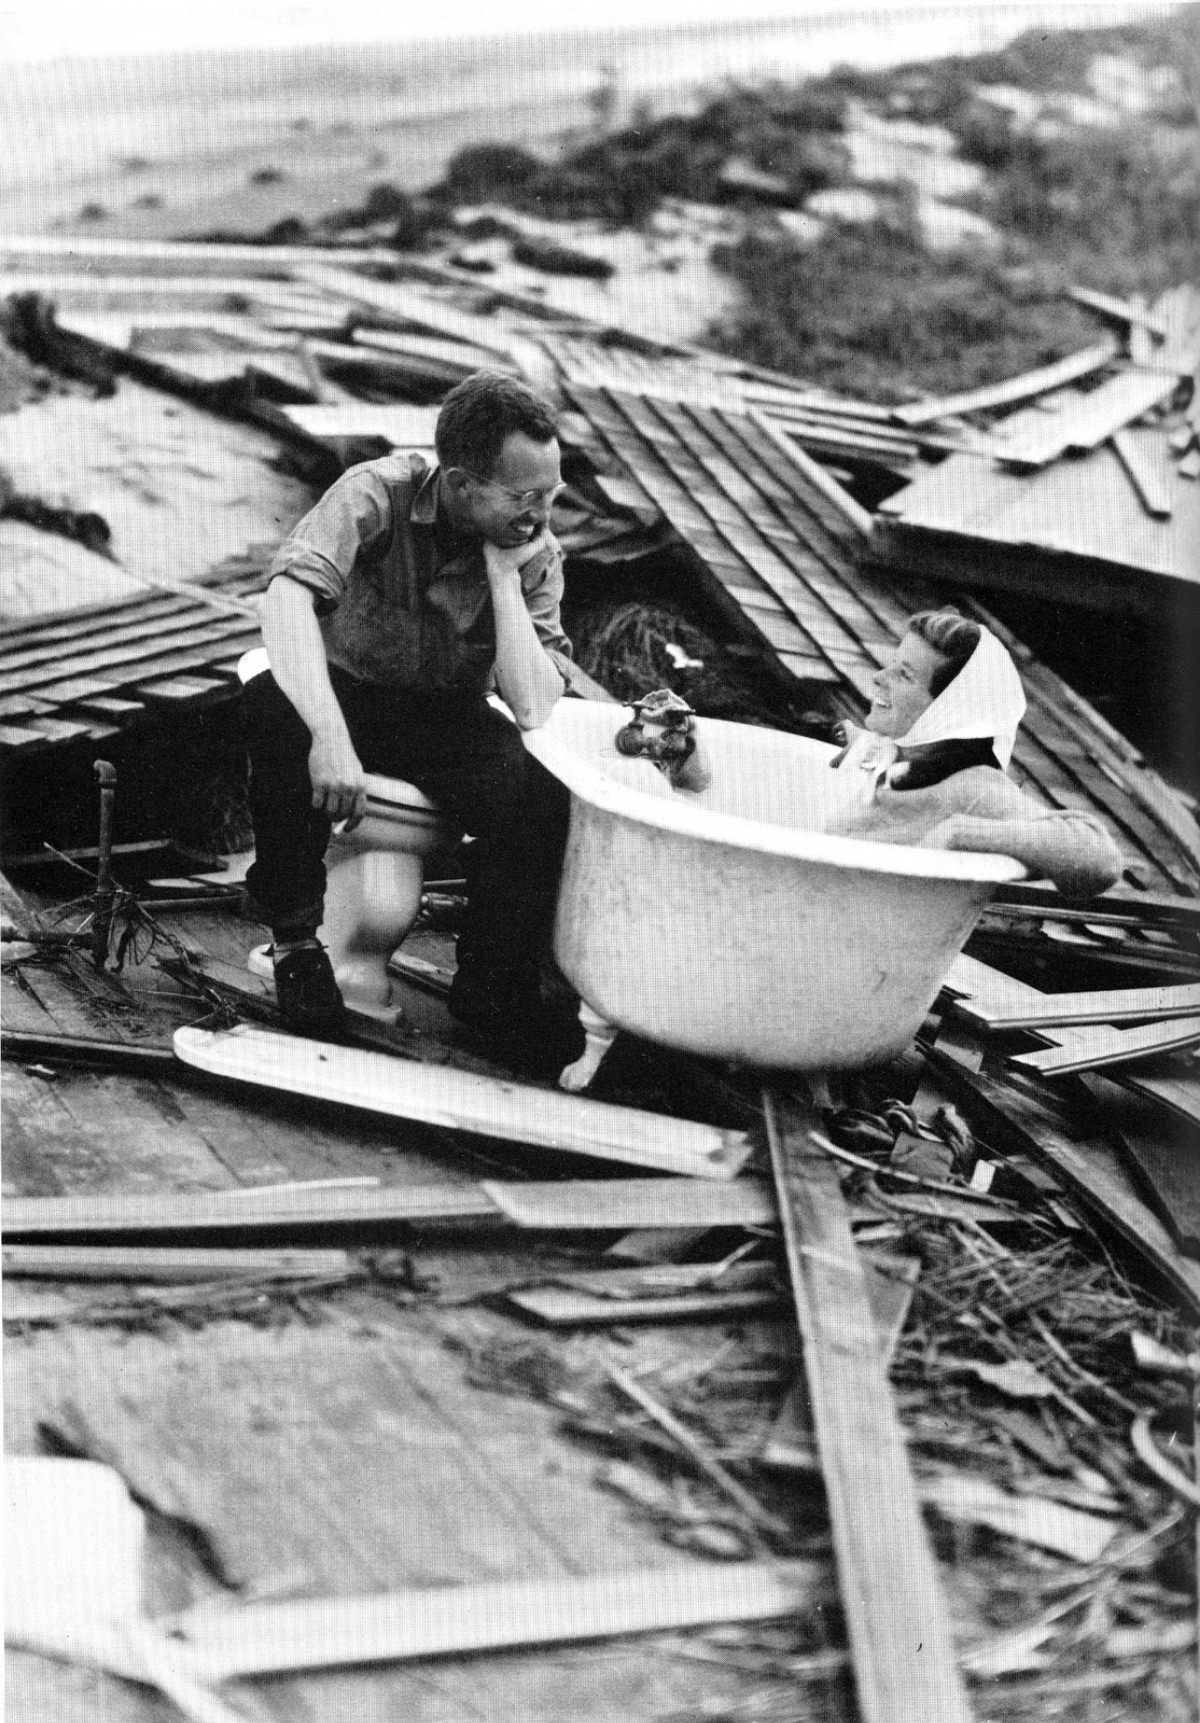 Kate Hepburn sitting in a tub after the Great New England Hurricane of 1938.